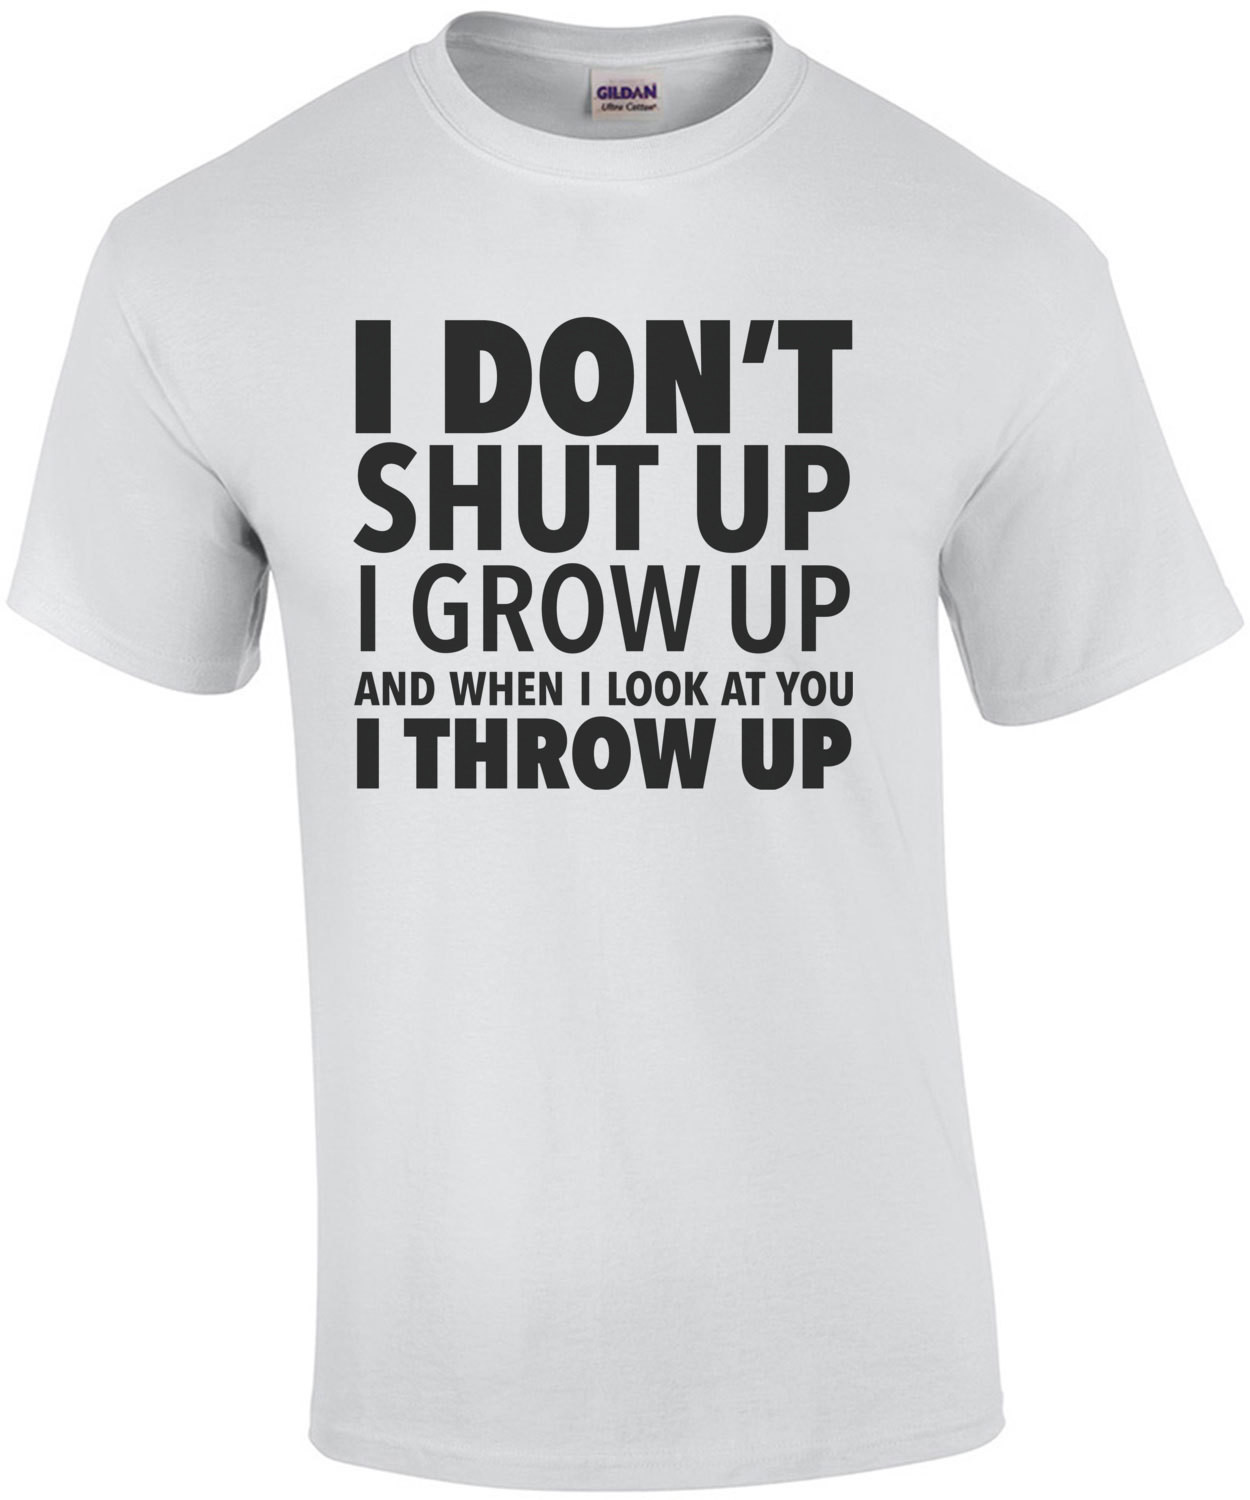 I don't shut up I grow up and when I look at you I throw up - Stand By Me T-Shirt - 80's t-shirt